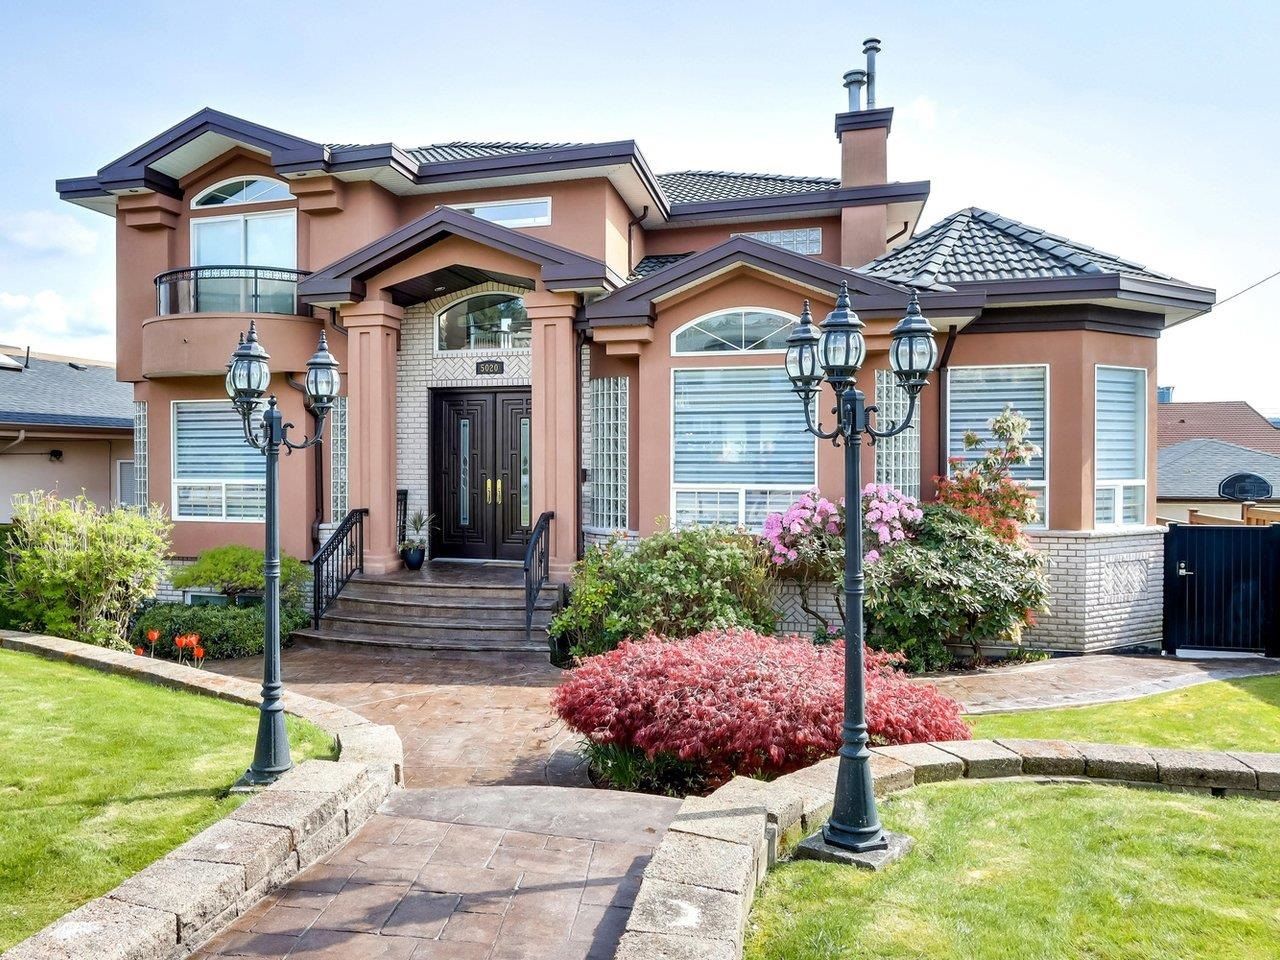 New property listed in Capitol Hill BN, Burnaby North